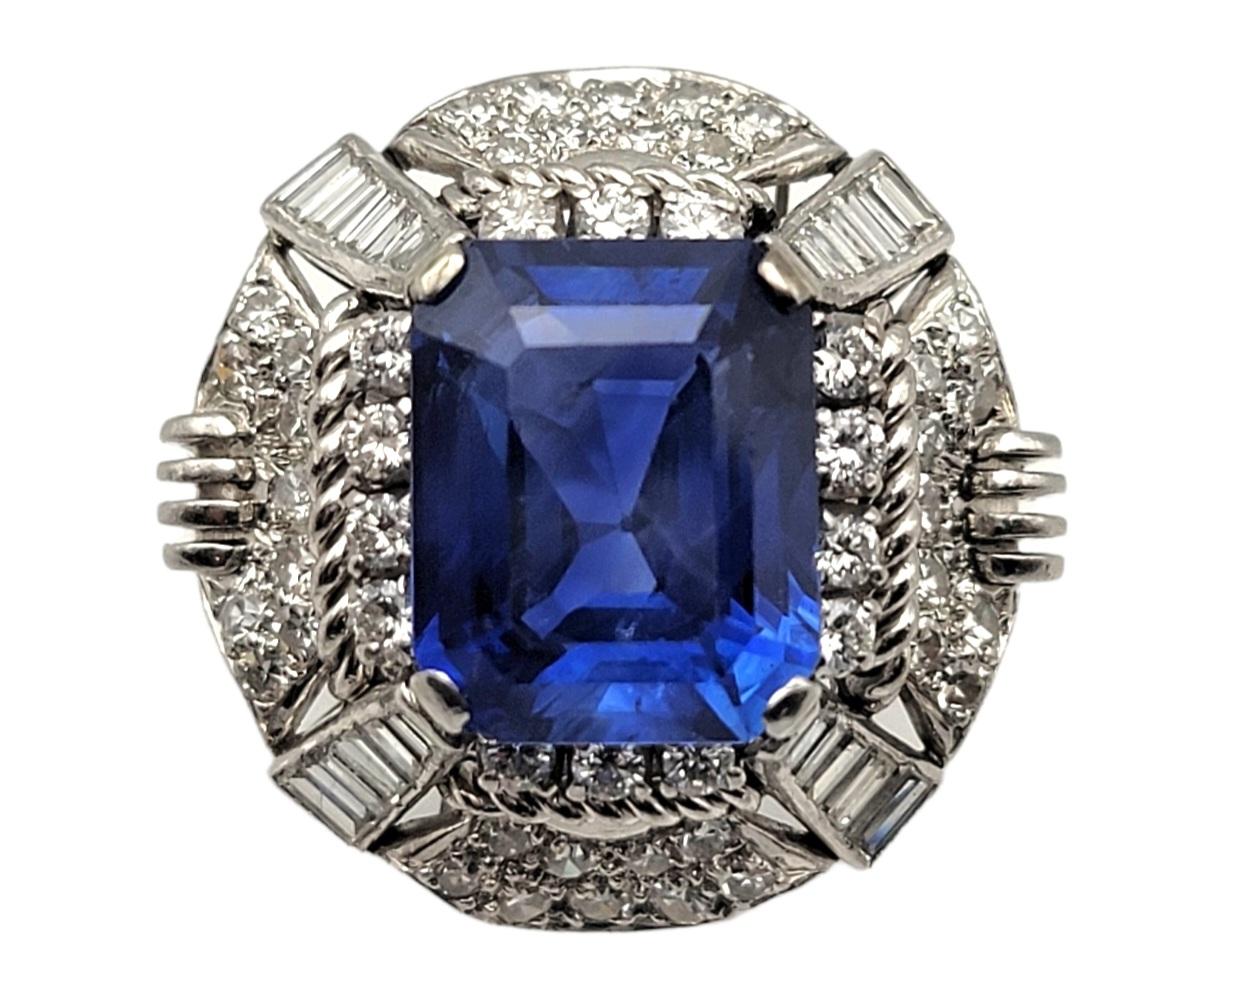 Absolutely breathtaking, rare emerald cut sapphire and diamond vintage cocktail ring. The brilliant blue stone against the bright white diamonds really catches the viewers eye. Exquisite detail work combined with the incredible, untreated sapphire